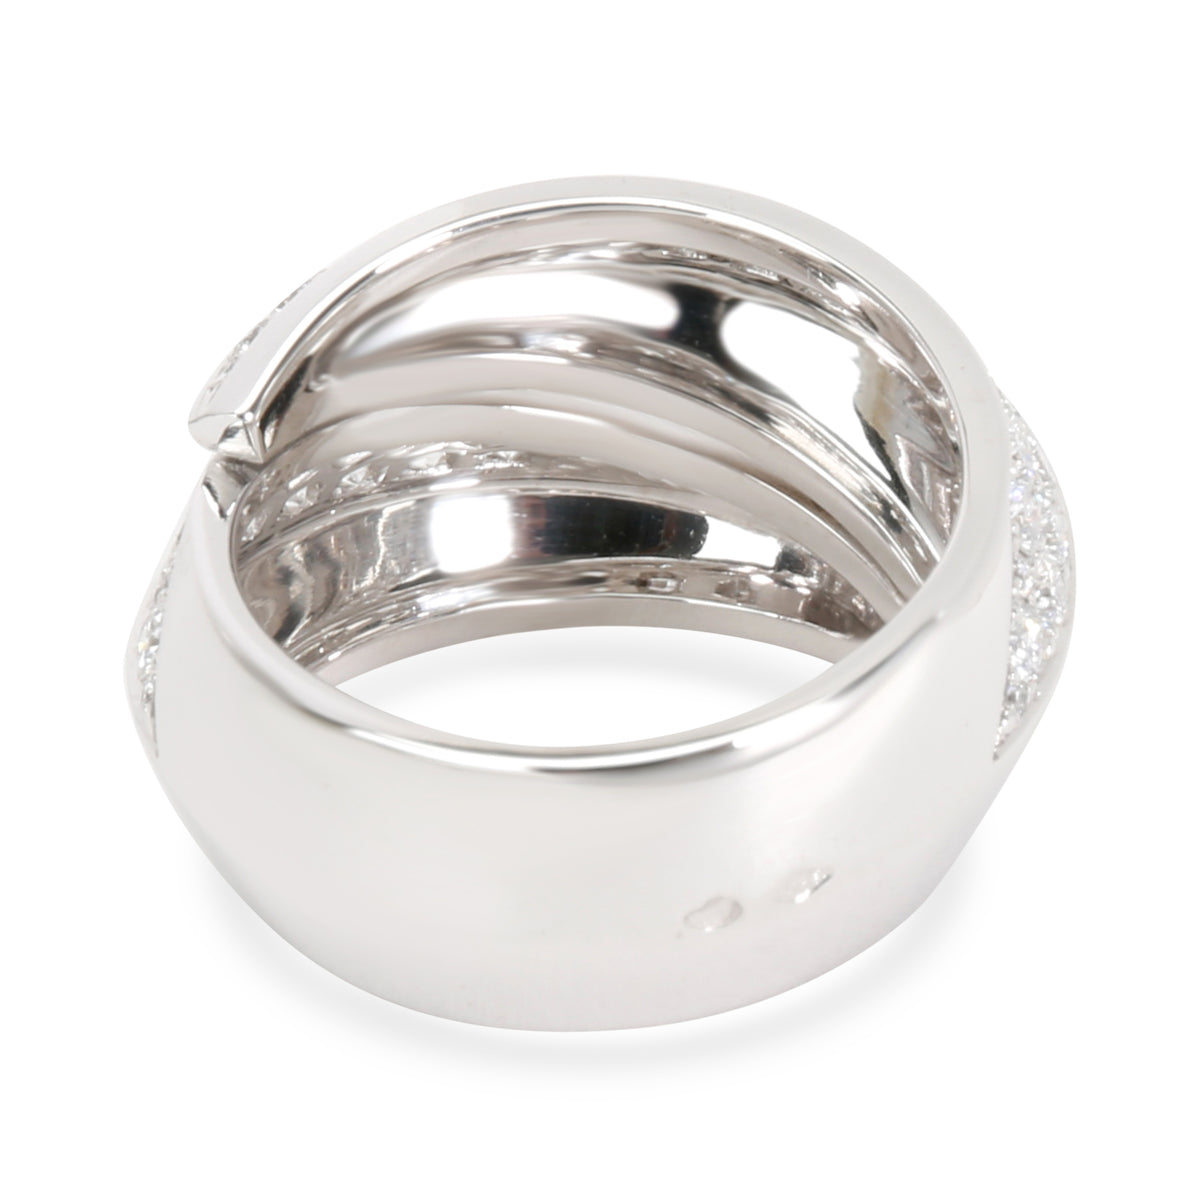 Cartier Panthere Griffe Ring in 18KT White Gold 1.70 ctw